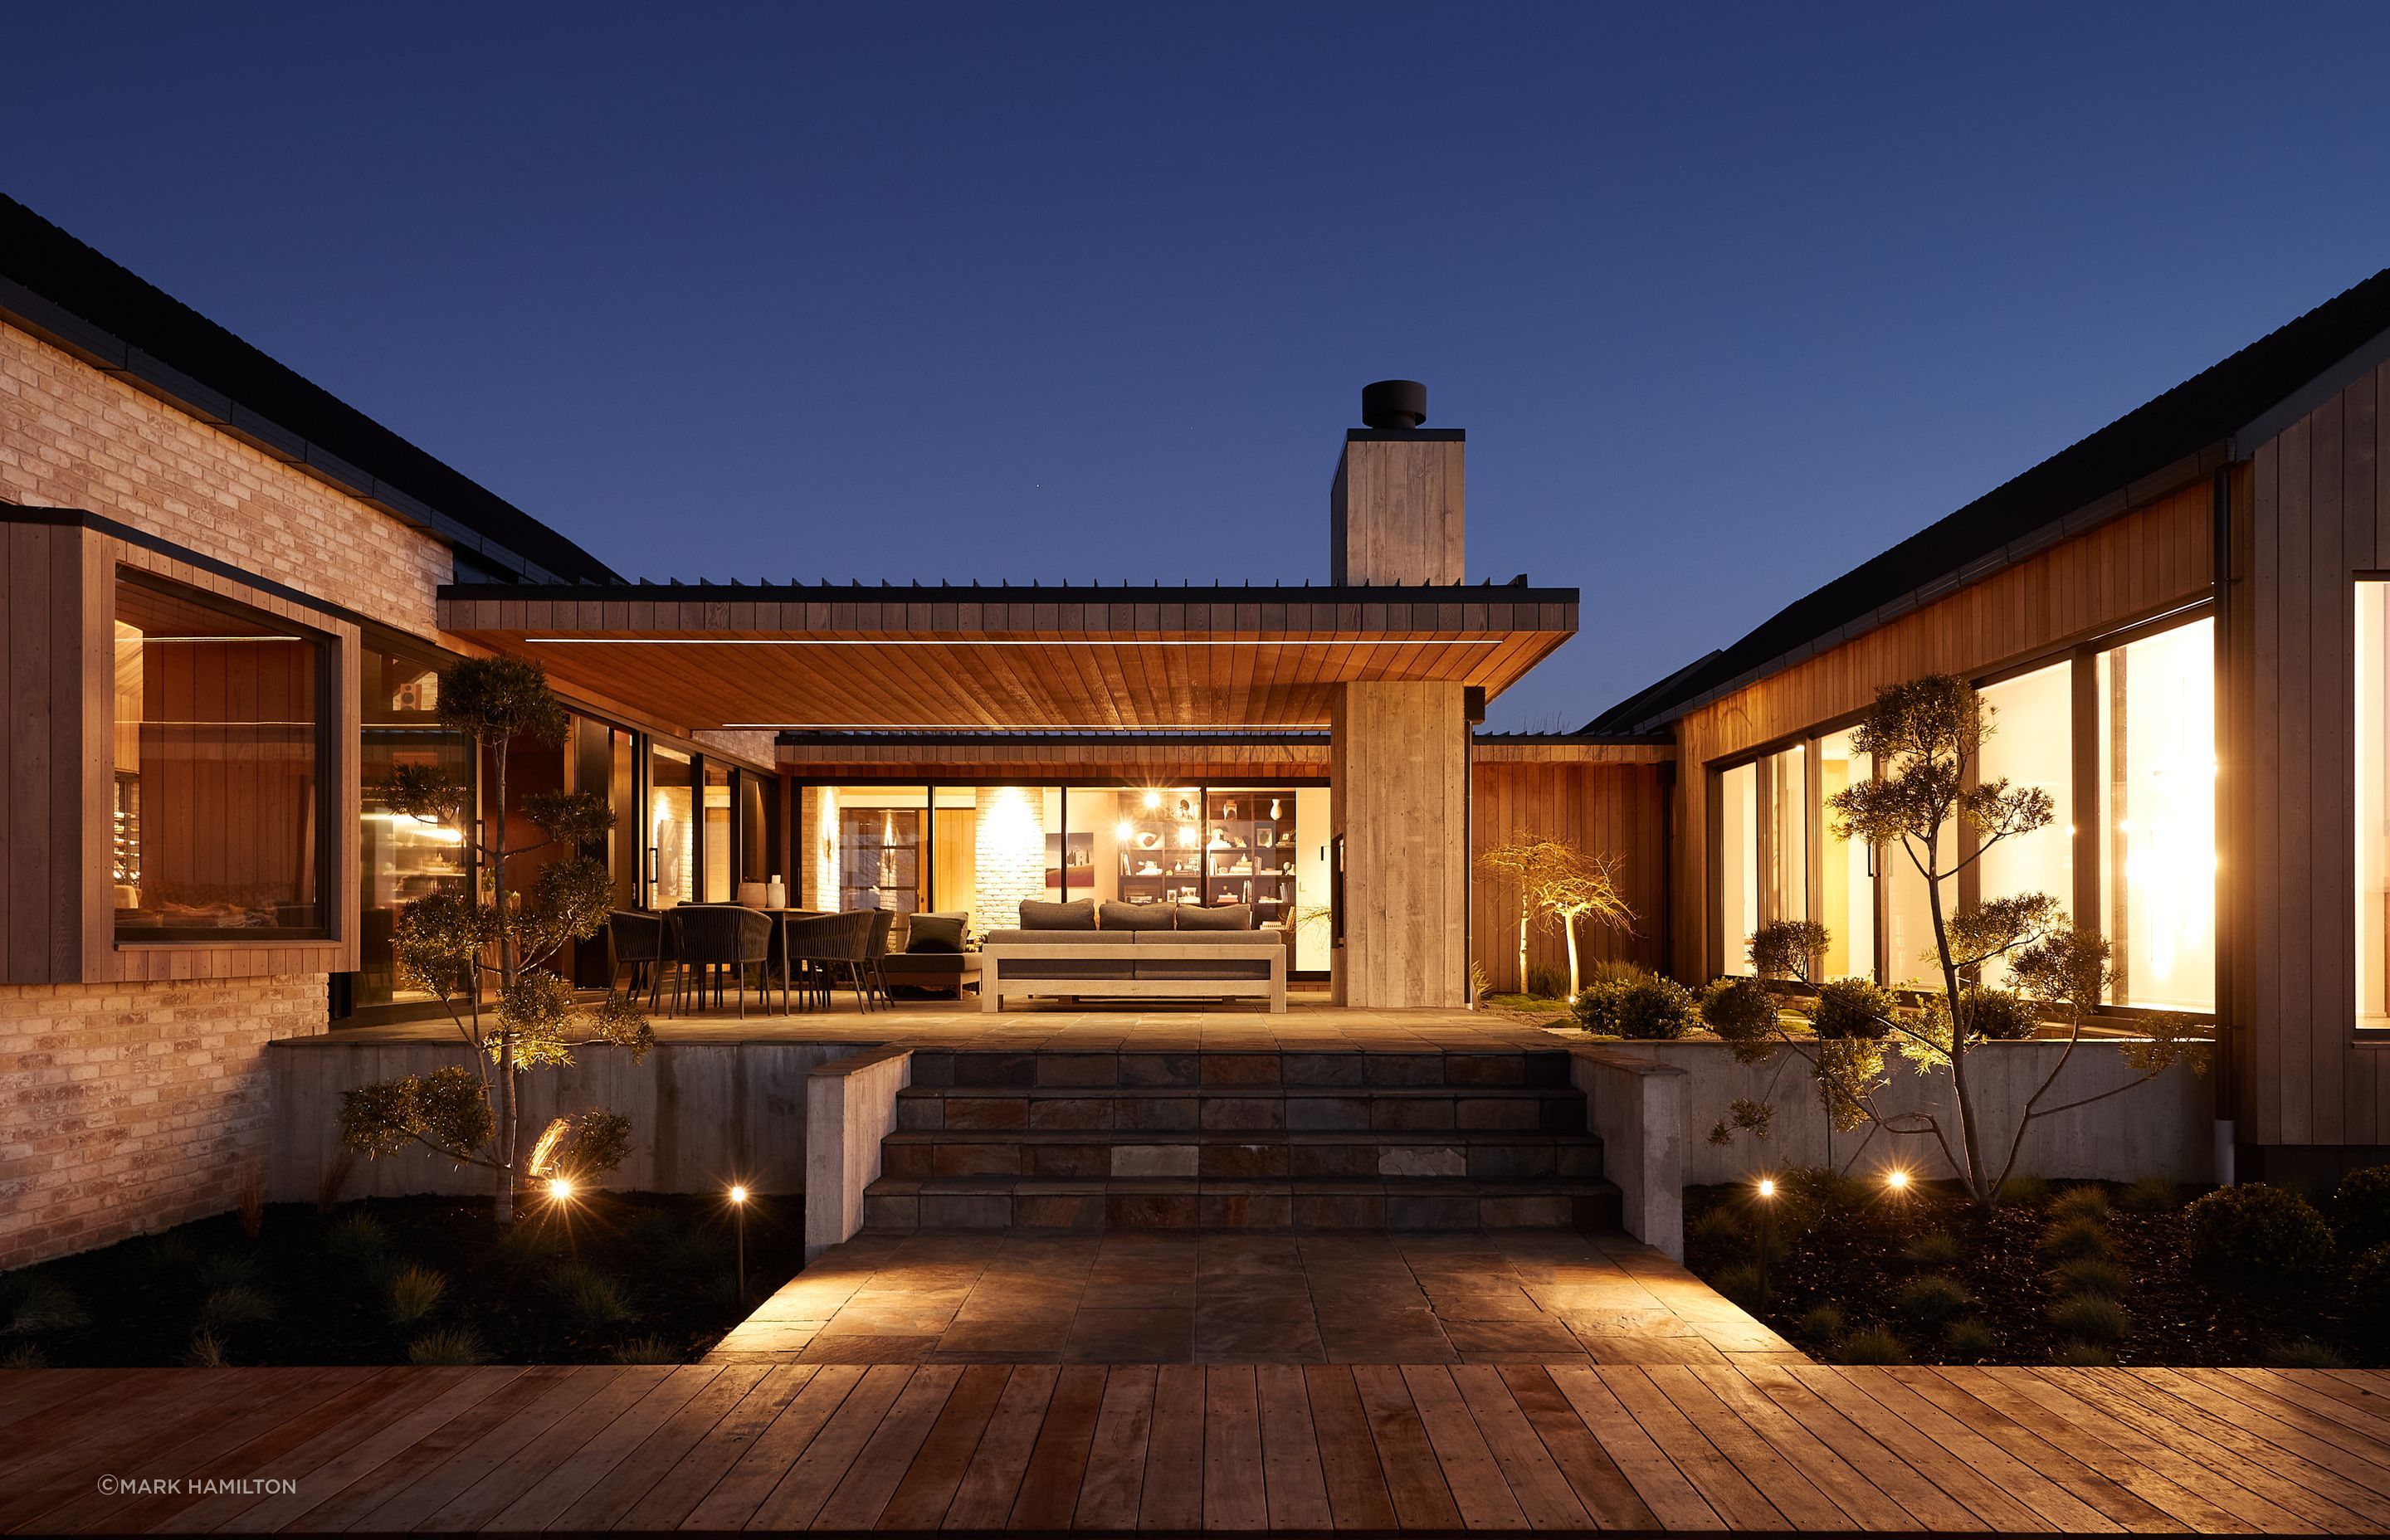 The outdoor internal courtyard with built-in outdoor fireplace features slate paving and Zen garden-like plantings.